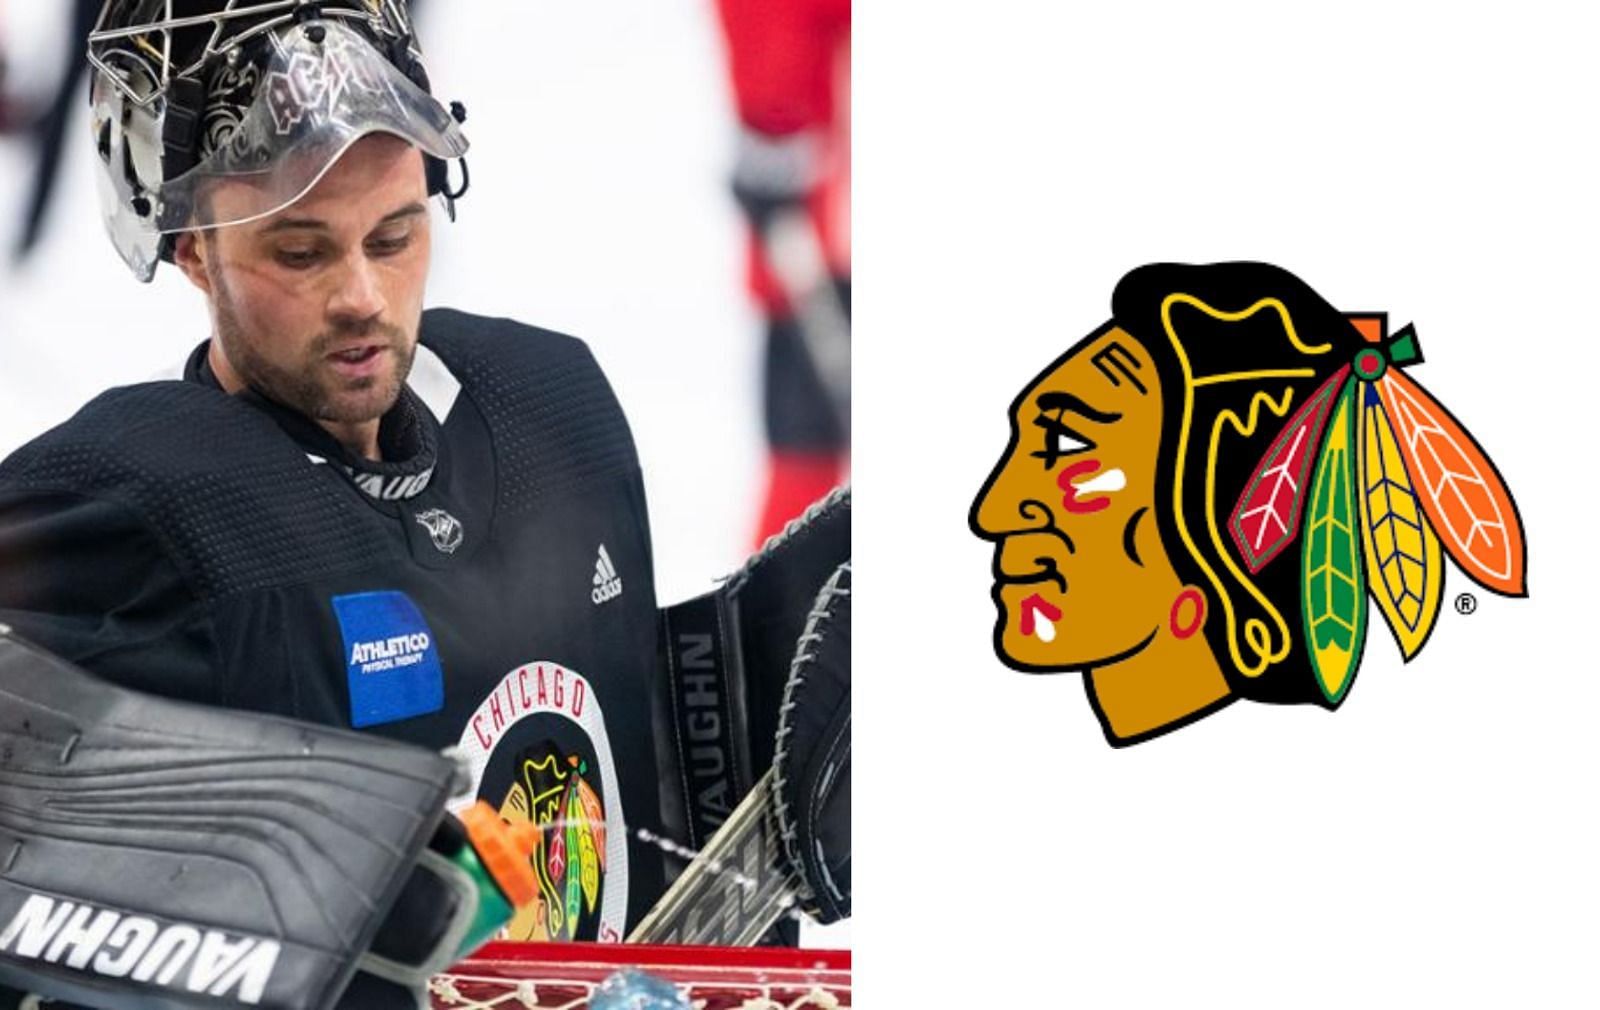 WMU alum Scott Foster, accountant and beer league goalie, plays for  Blackhawks in emergency backup role